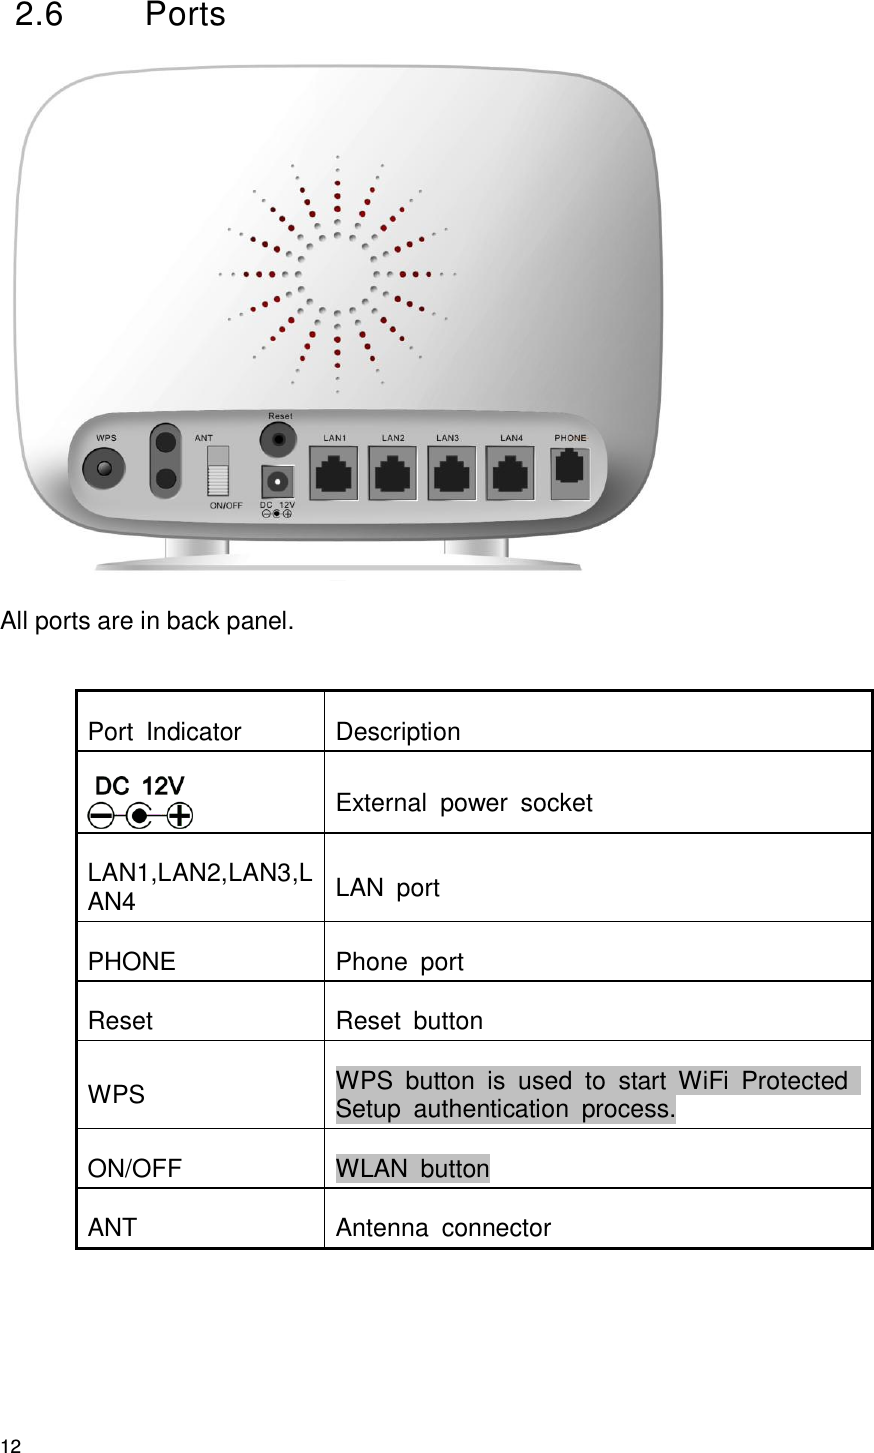 12 2.6  Ports  All ports are in back panel.  Port  Indicator Description  External  power  socket LAN1,LAN2,LAN3,LAN4 LAN  port PHONE Phone  port Reset Reset  button WPS WPS  button  is  used  to  start  WiFi  Protected Setup  authentication  process. ON/OFF WLAN  button ANT Antenna  connector   